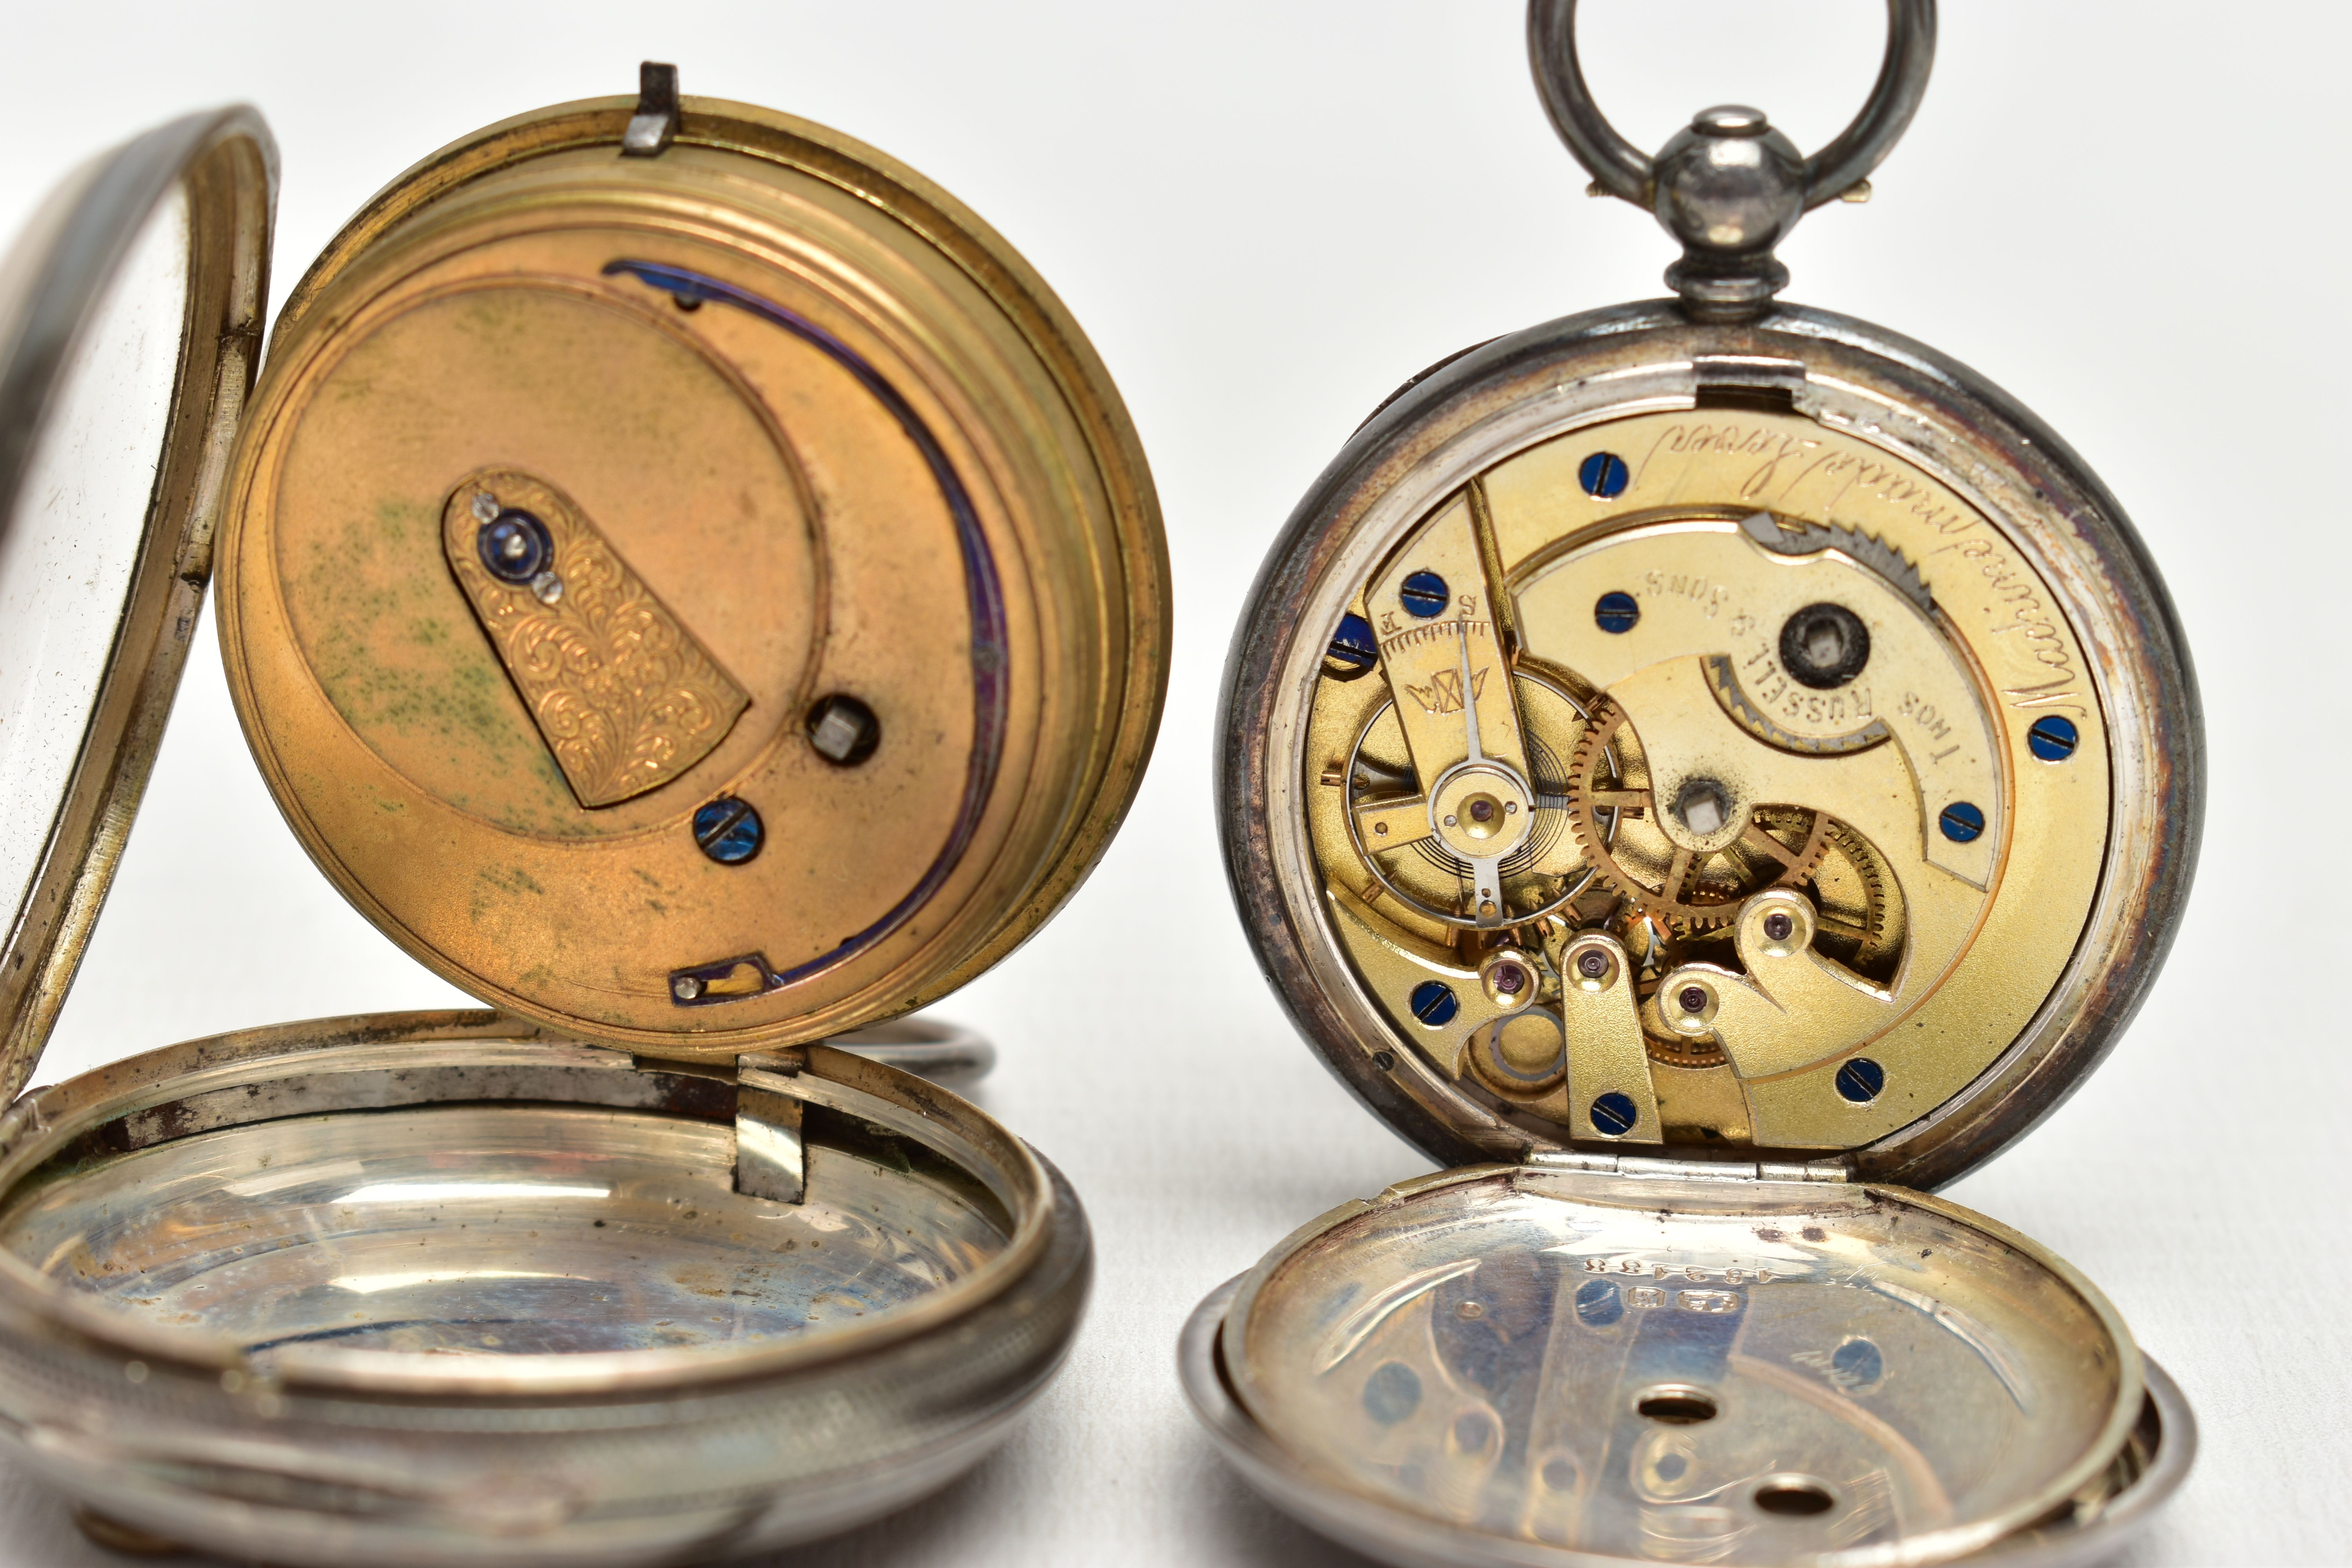 TWO OPEN FACE POCKET WATCHES AND WATCH KEY, the first a silver open face pocket watch, key wound, - Image 5 of 6